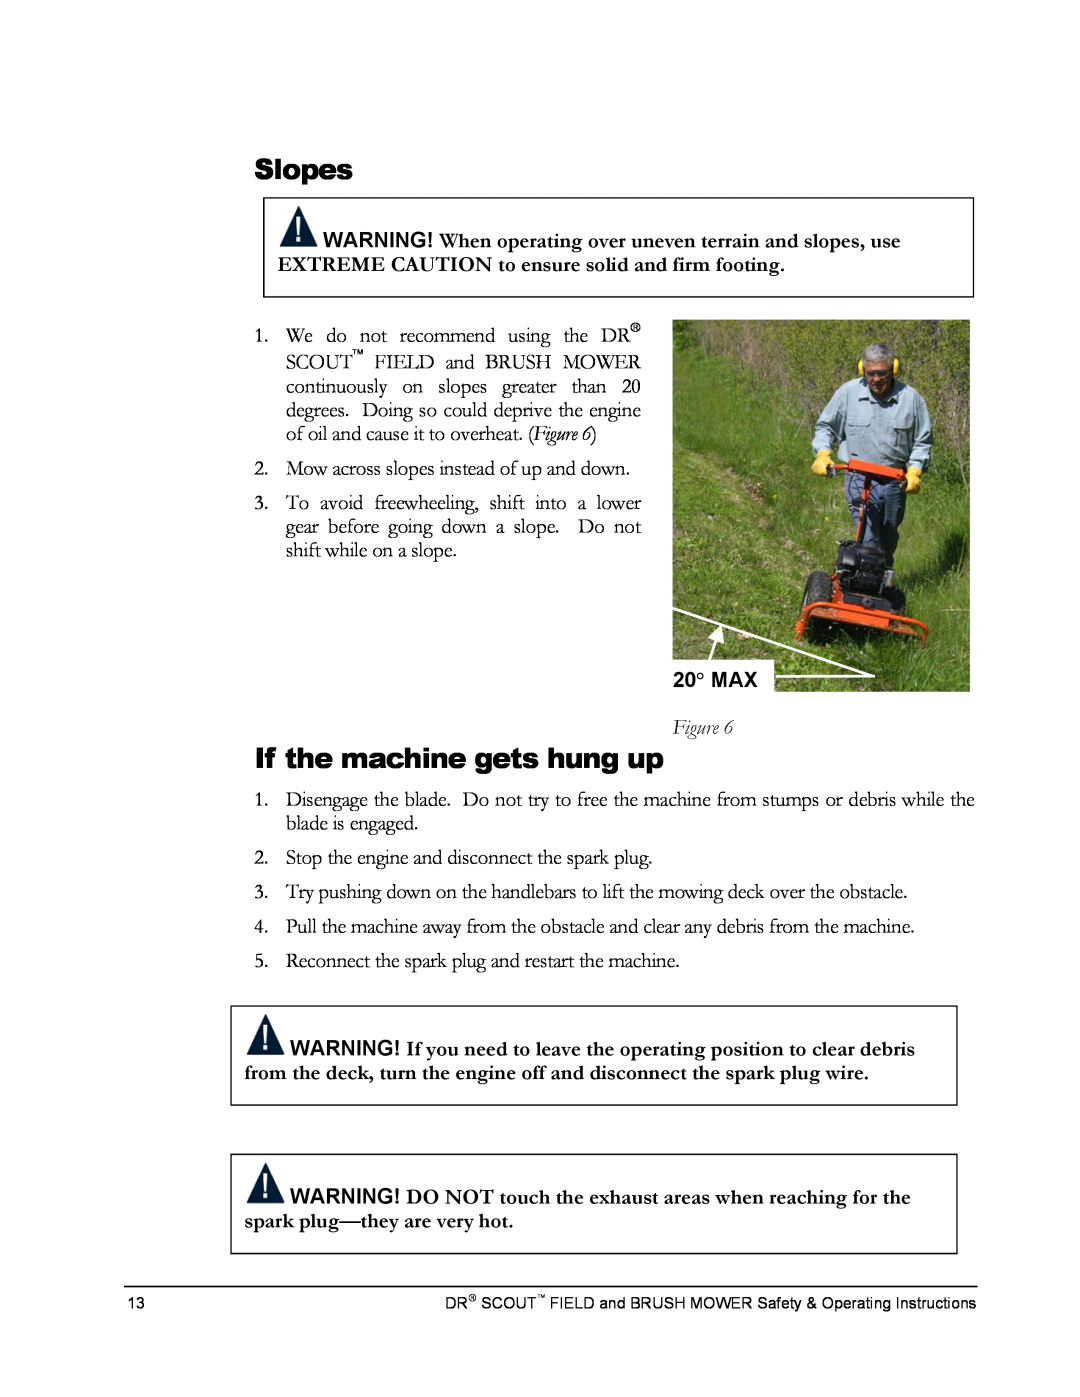 Country Home Products DR SCOUT FIELD and BRUSH MOWER manual Slopes, If the machine gets hung up, 20 MAX 